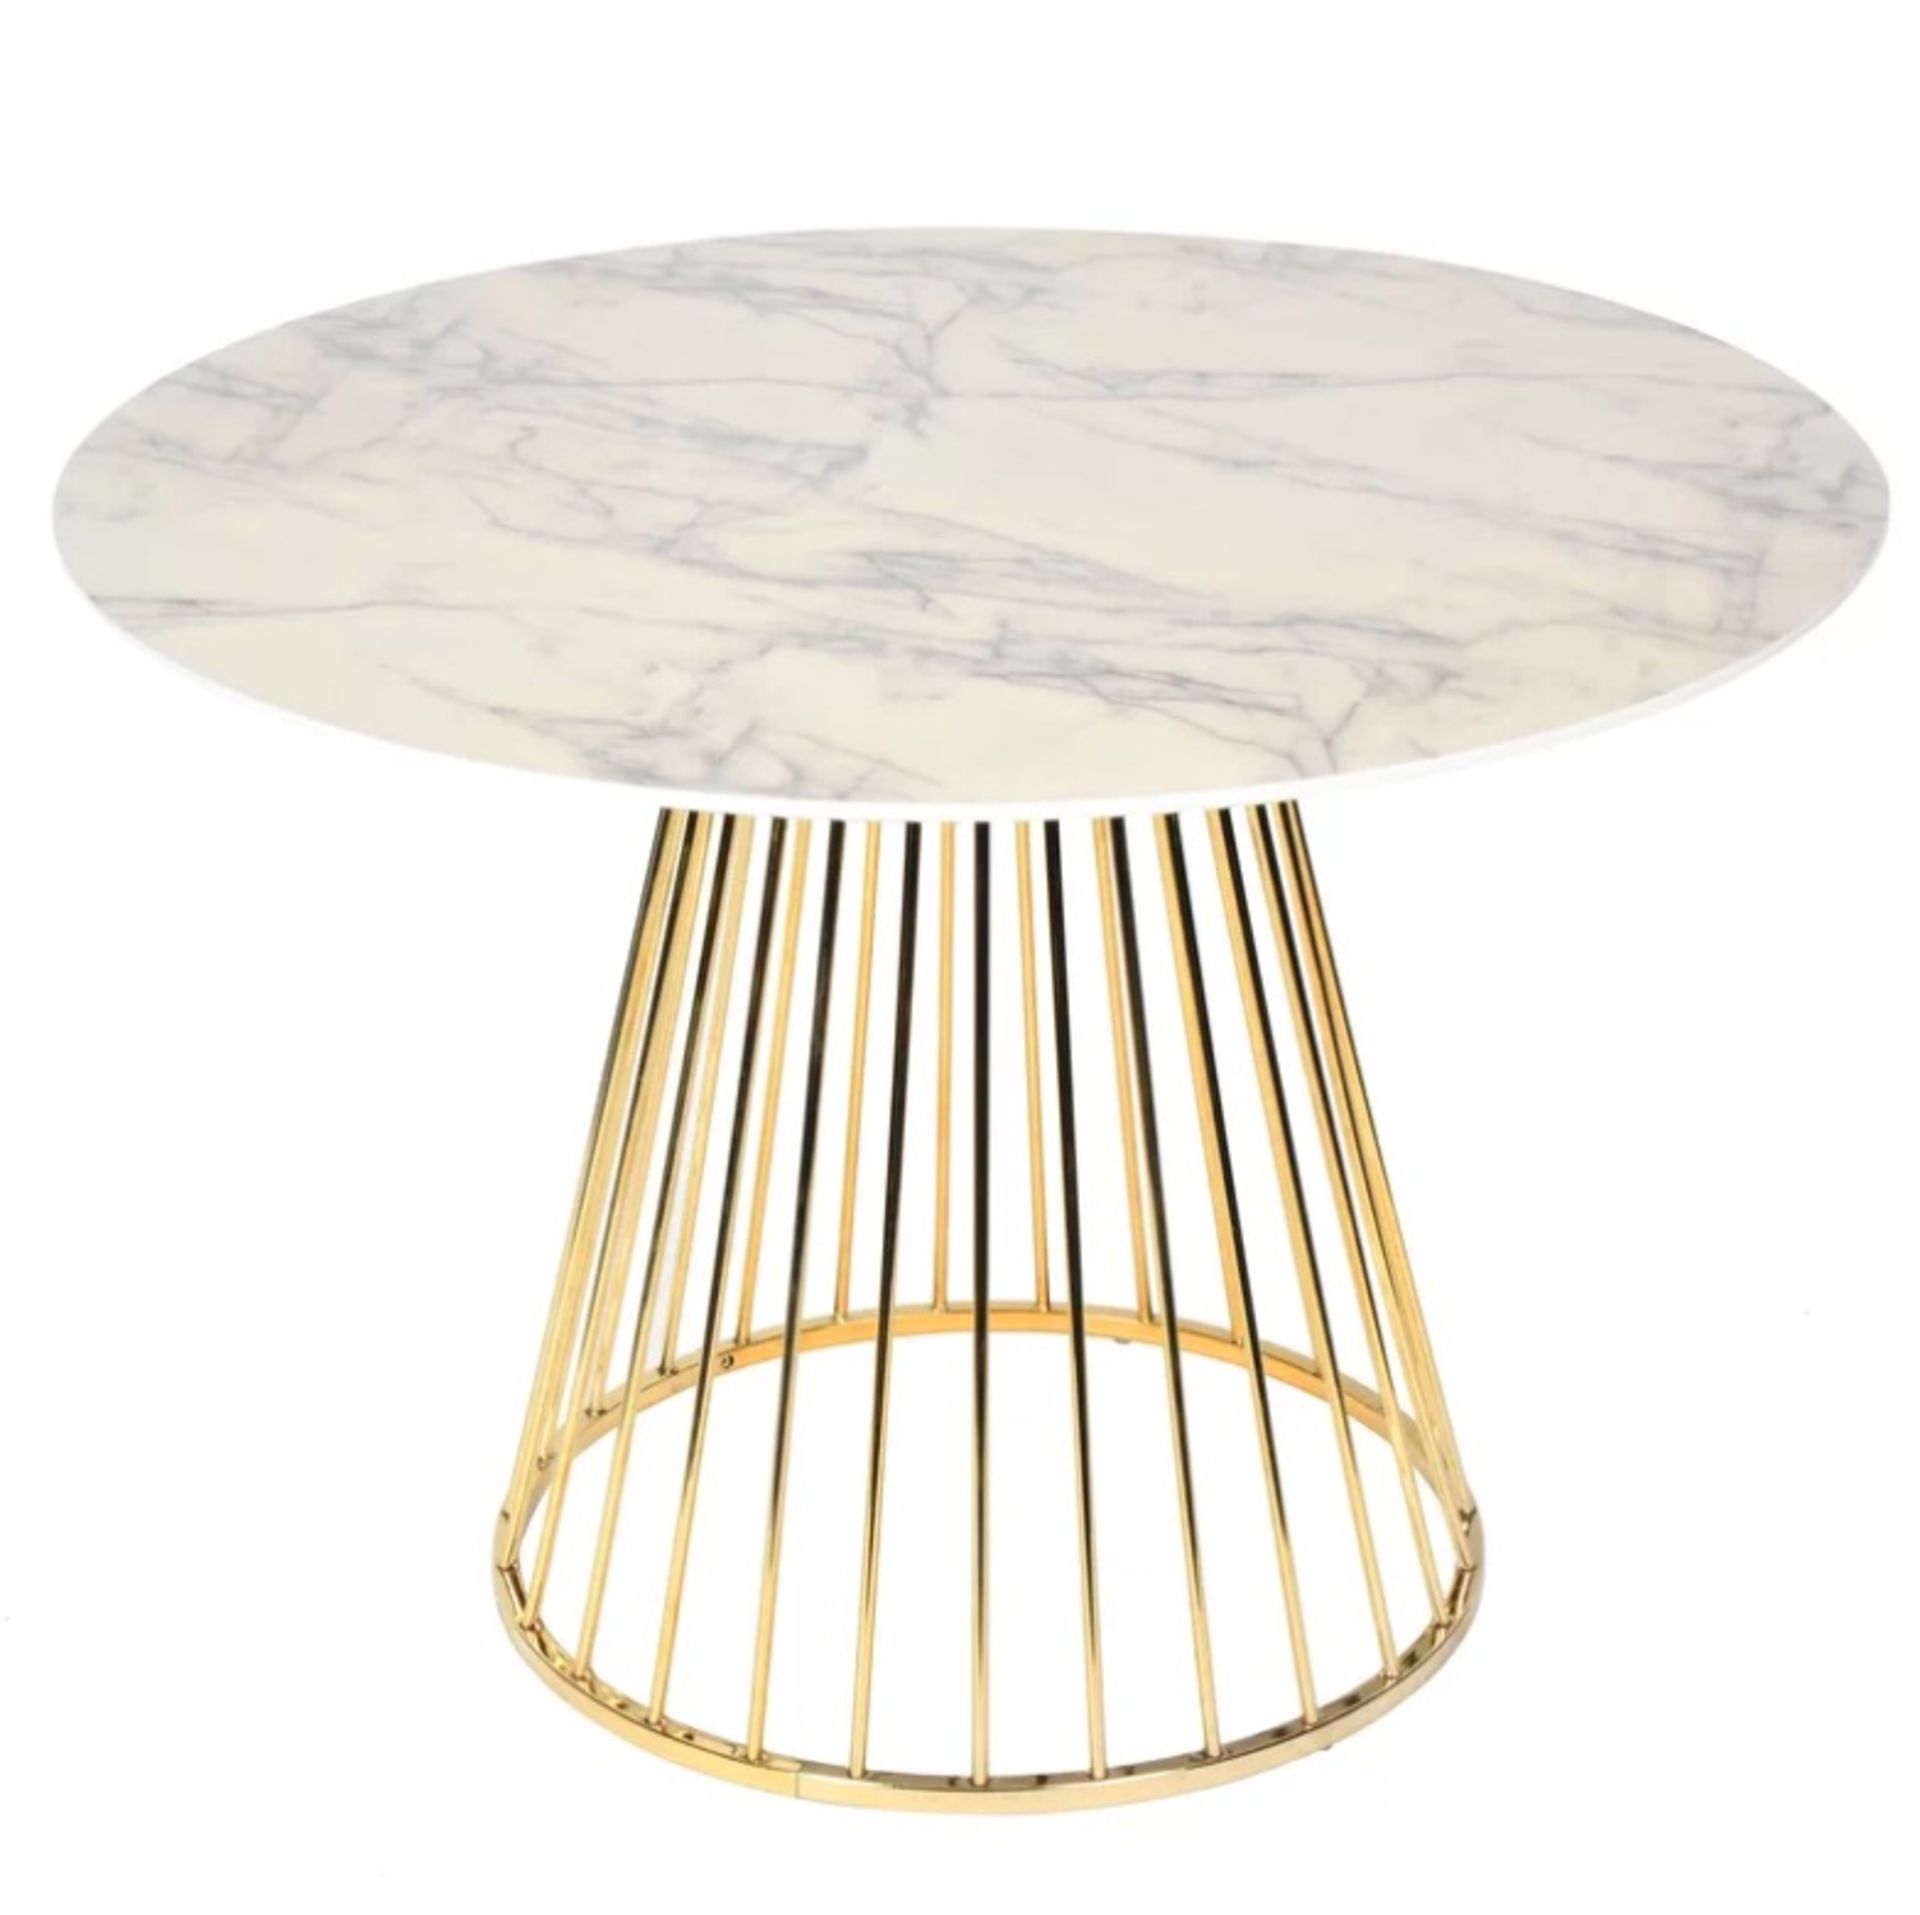 Deco Dining Table This Dining Table Is A Statement Furniture Piece Perfect For Any Modern Home